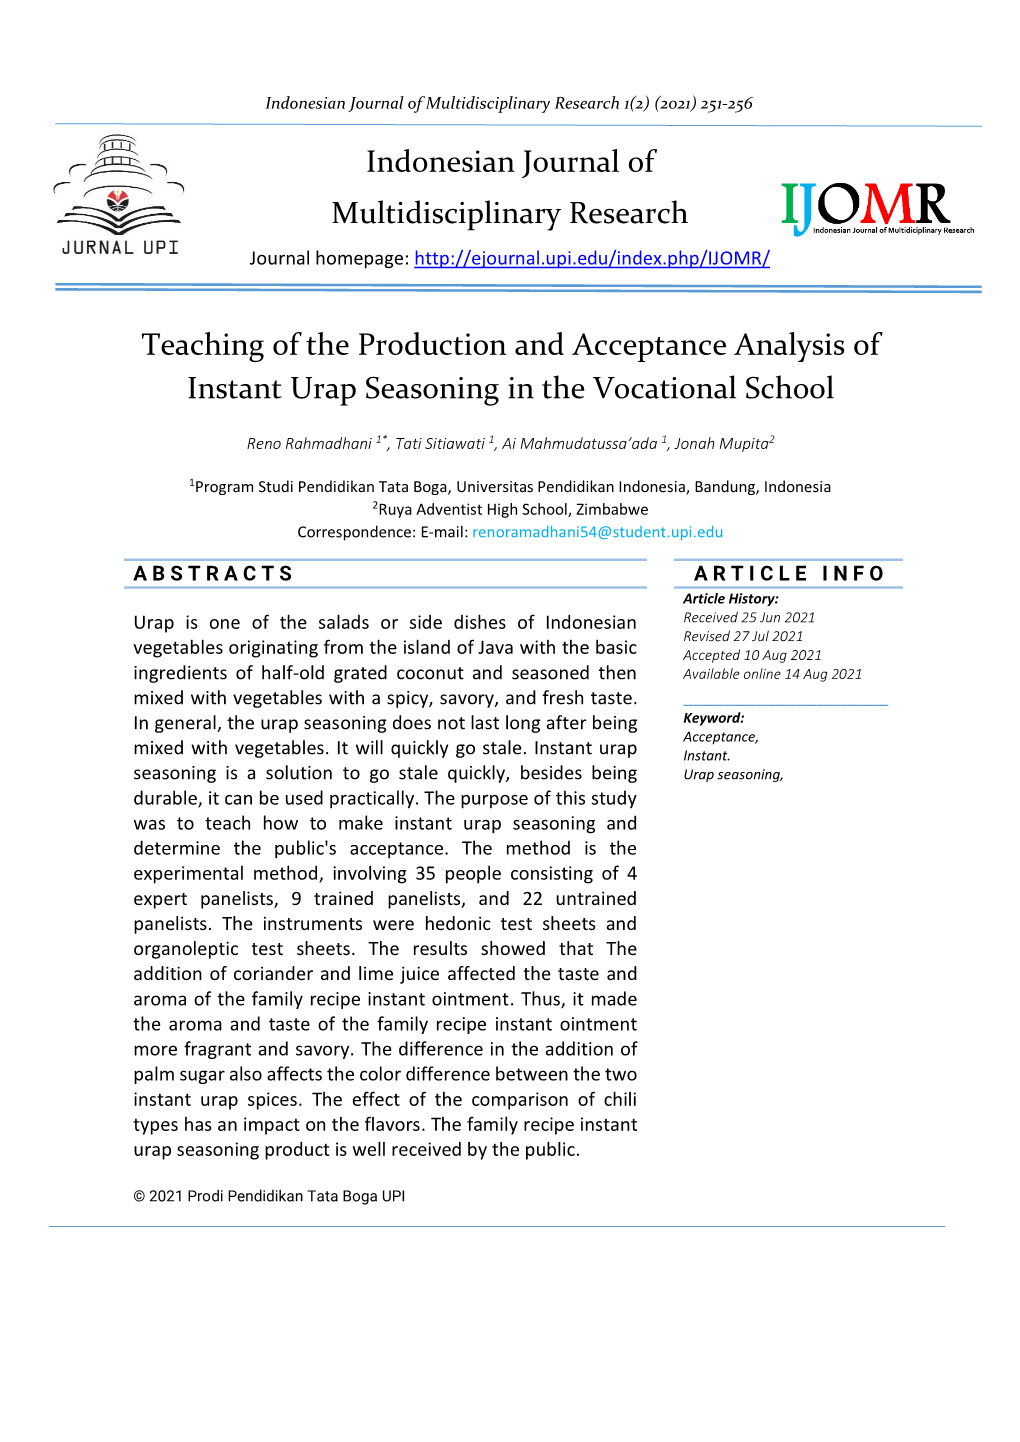 Teaching of the Production and Acceptance Analysis of Instant Urap Seasoning in the Vocational School